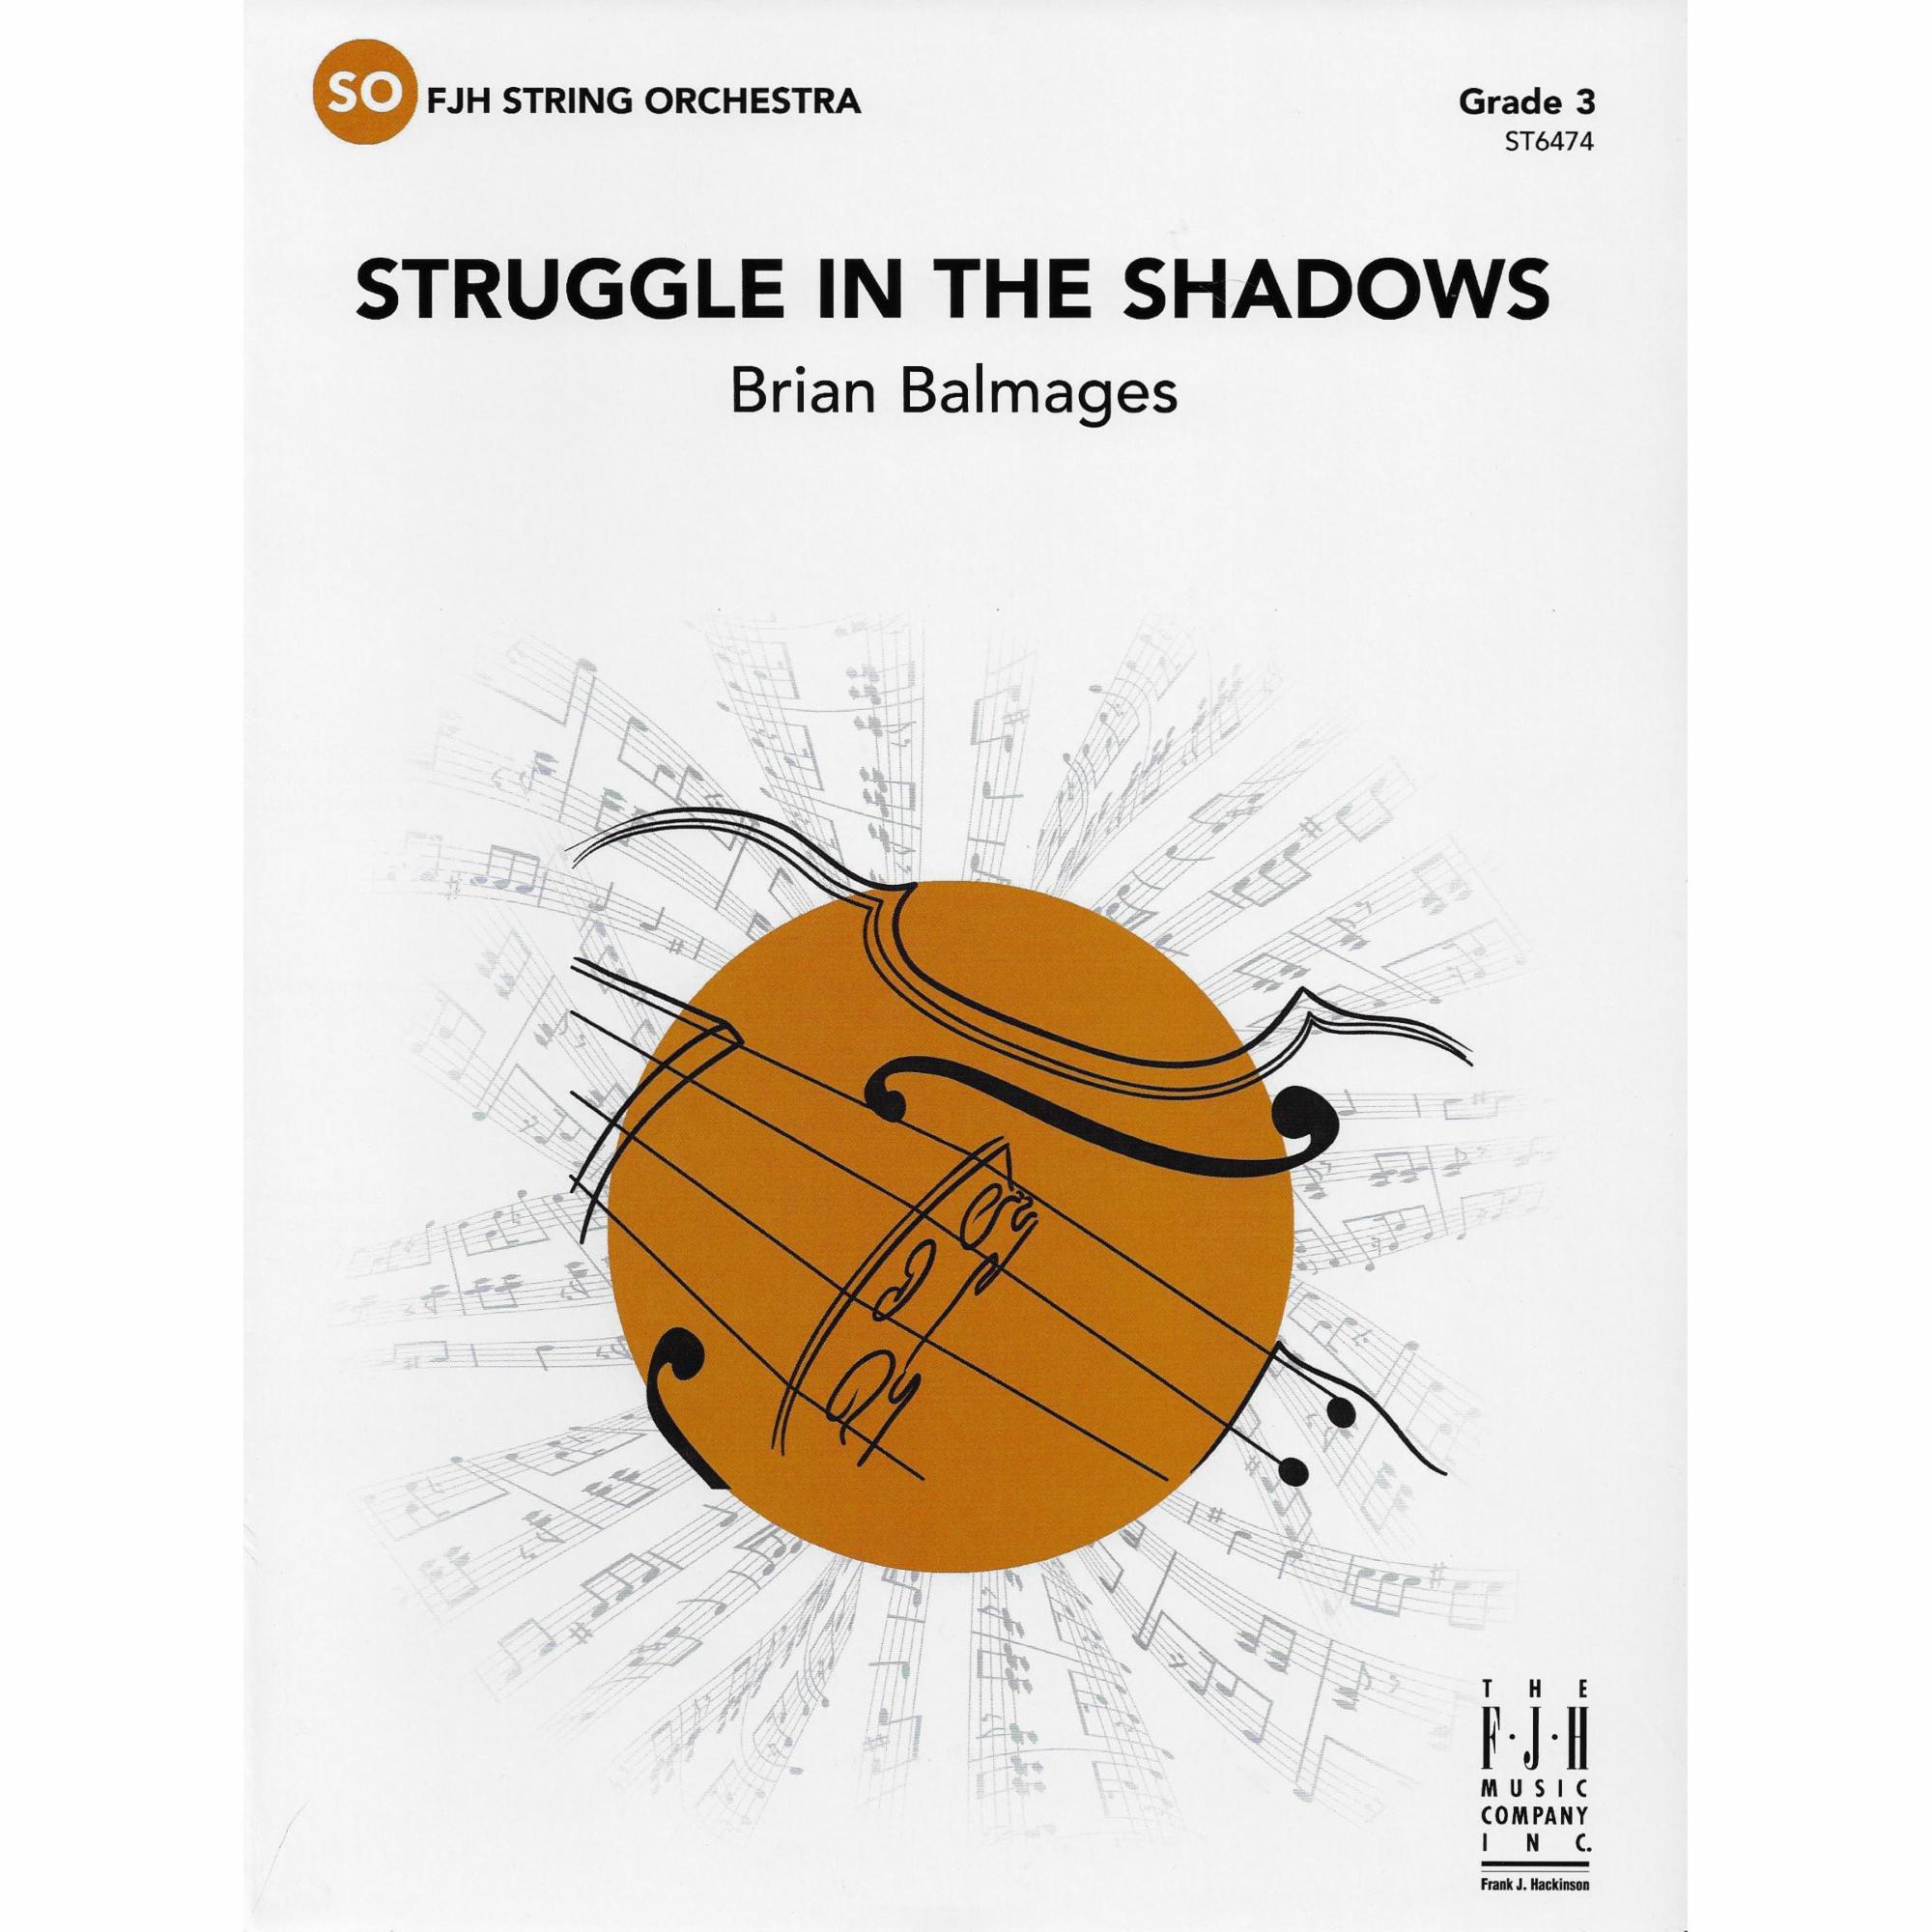 Struggle in the Shadows for String Orchestra